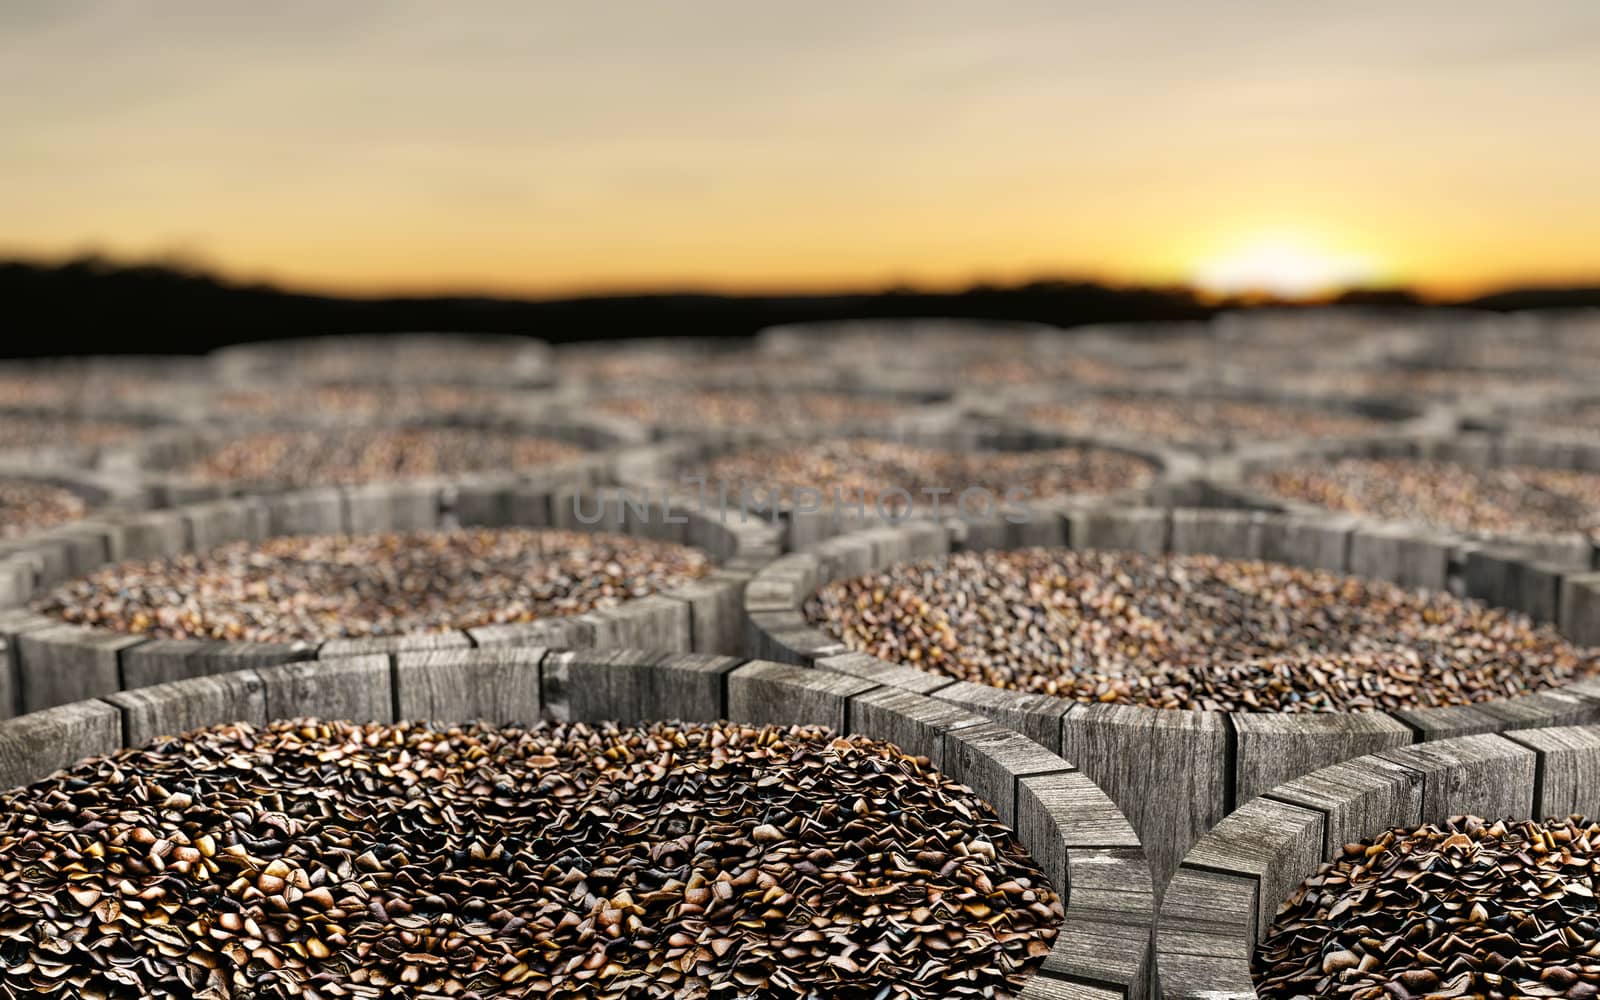 3d rendering of coffee beans in wooden barrel against blurred sunrise clear sky